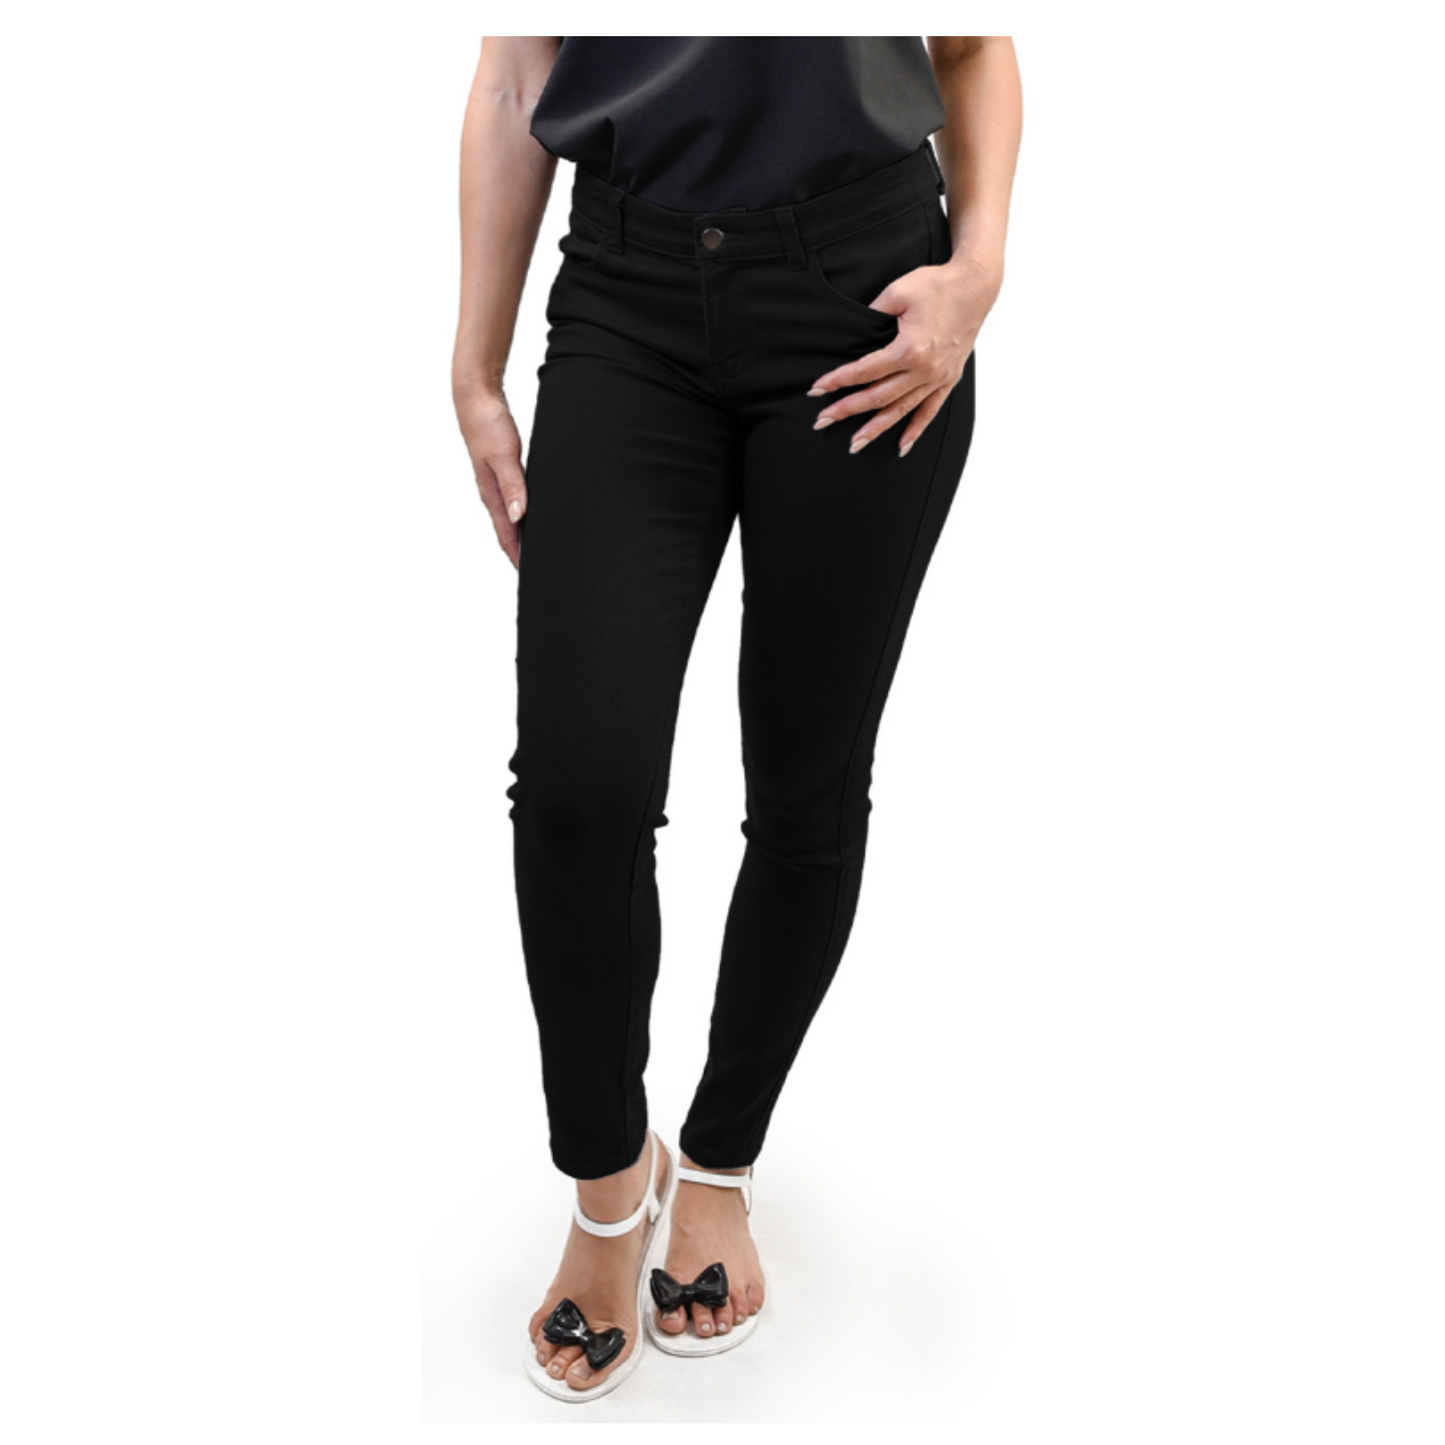 Young USA Ladies' pants with front usable pockets in Black